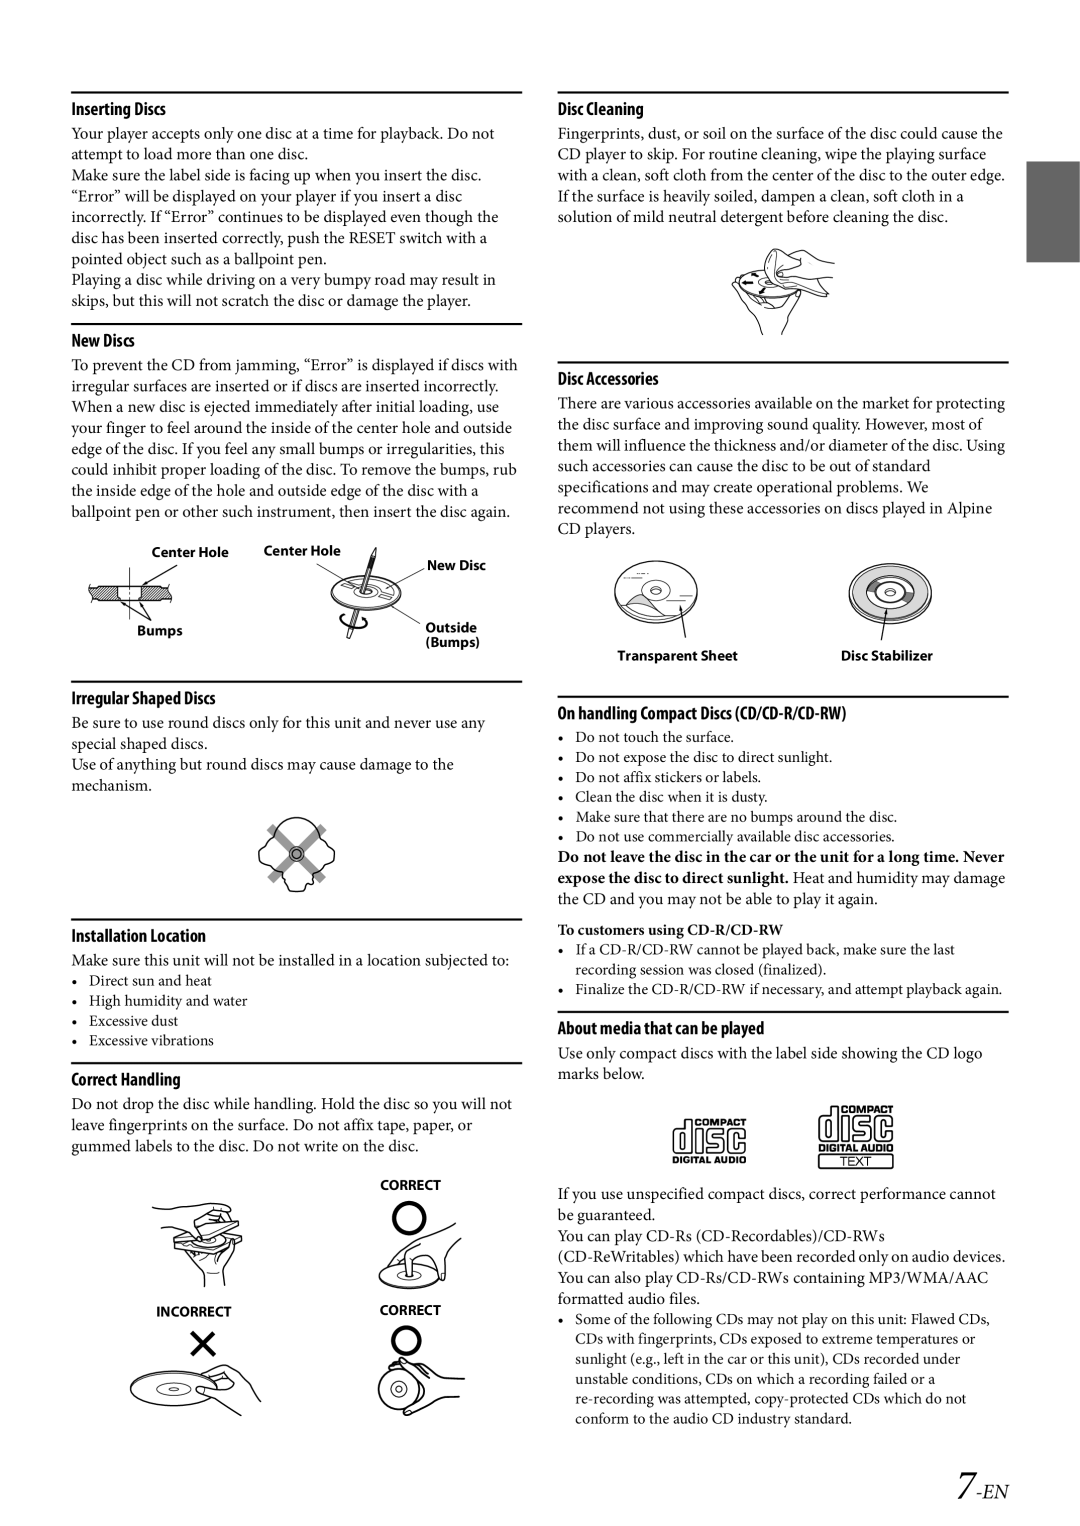 Alpine CDE-HD149BT owner manual 7-EN, Inserting Discs, New Discs, Installation Location, Correct Handling, Disc Cleaning 